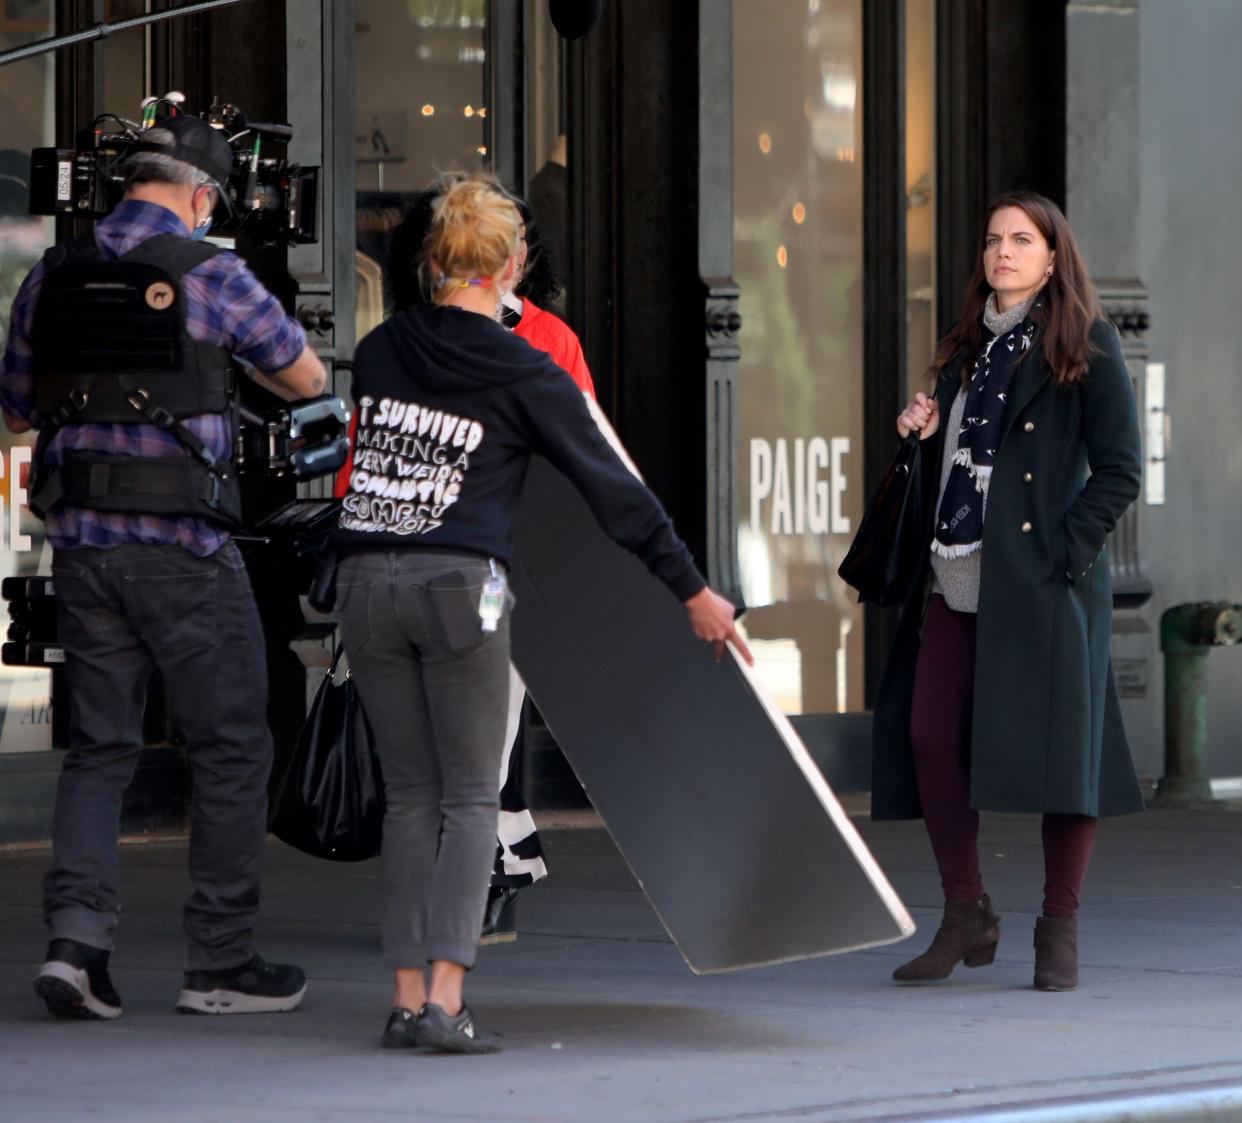 Anna Chlumsky, right, is seen on the set of the Netflix series "Inventing Anna" on Oct. 14, 2020, in New York City.